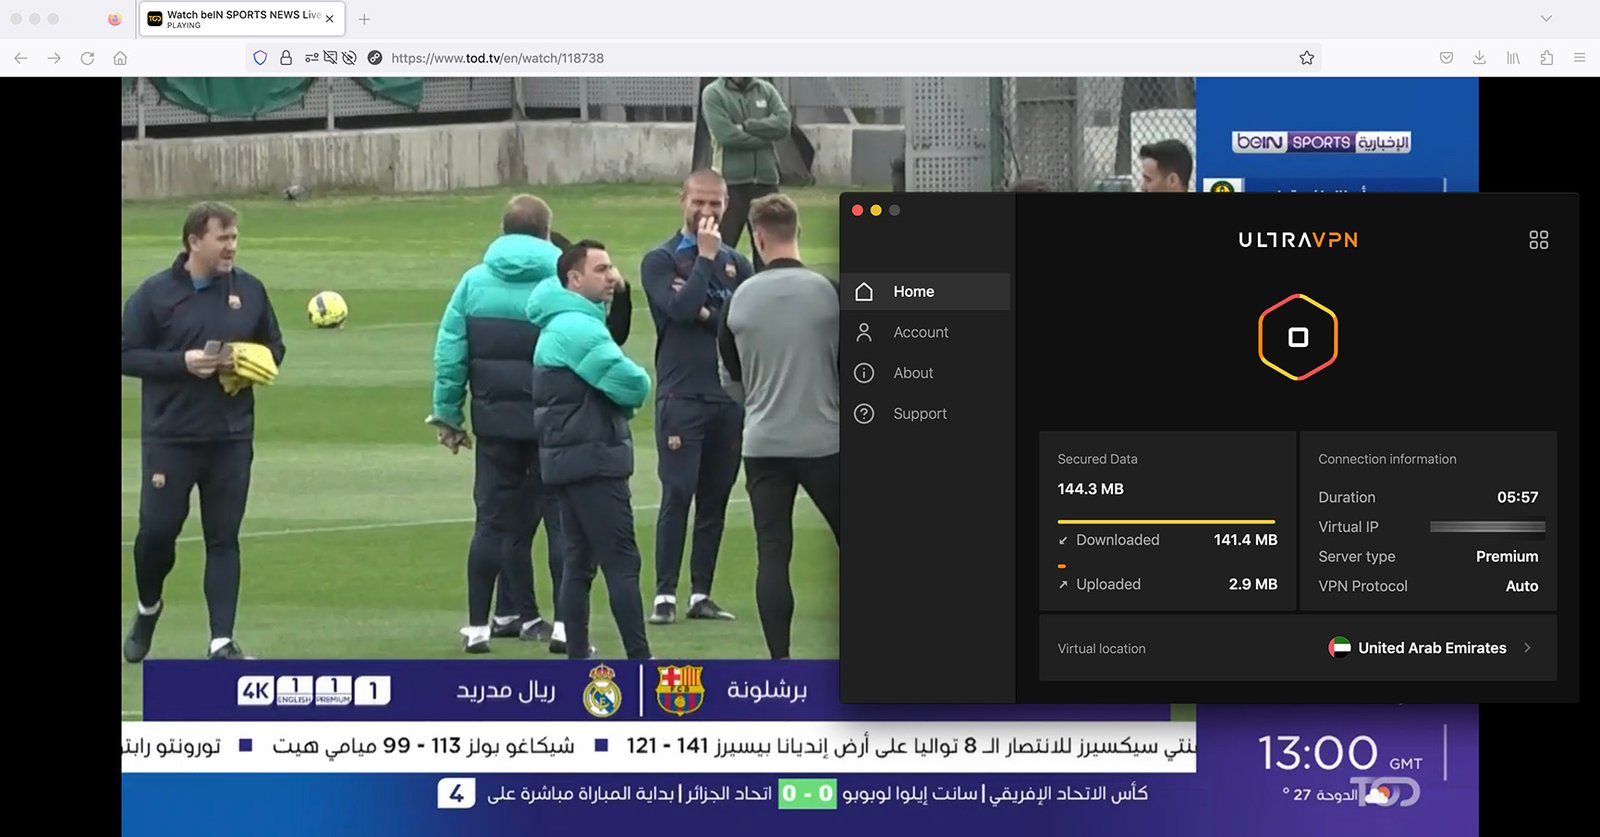 Watch TOD TV abroad - Streaming Live beIn Sports news with UltraVPN